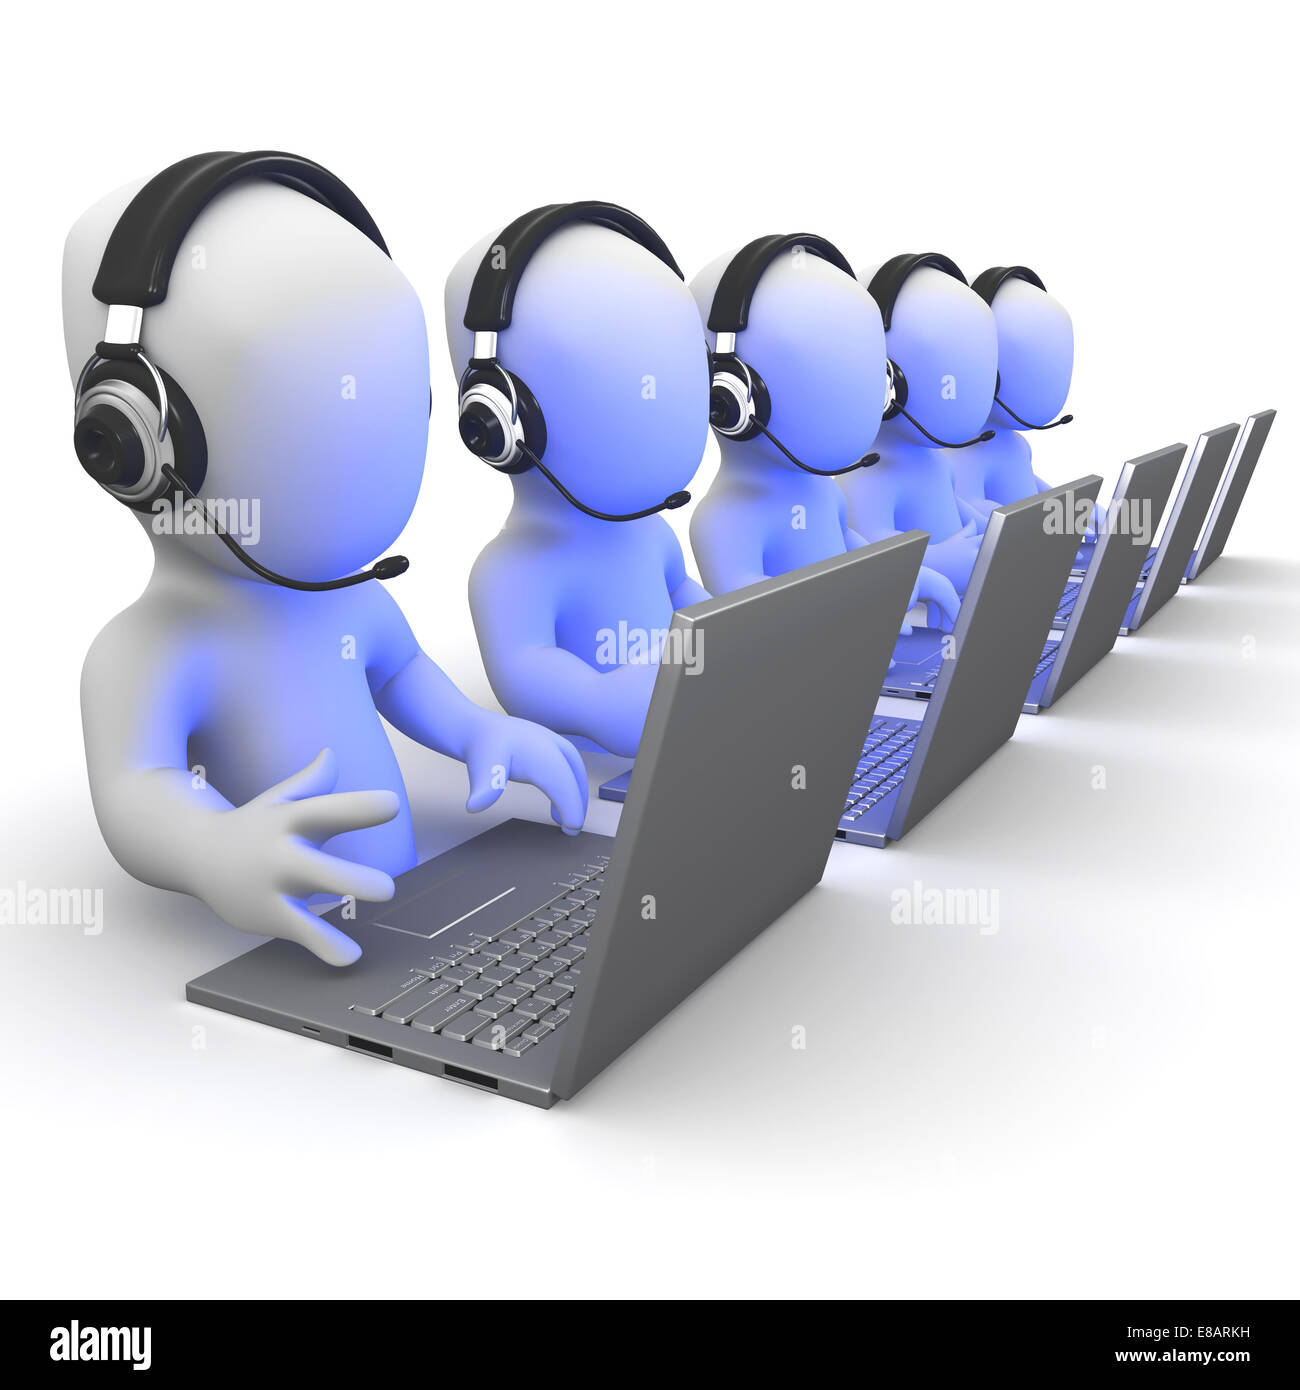 3d render of a group of little people working on laptops wearing headsets Stock Photo